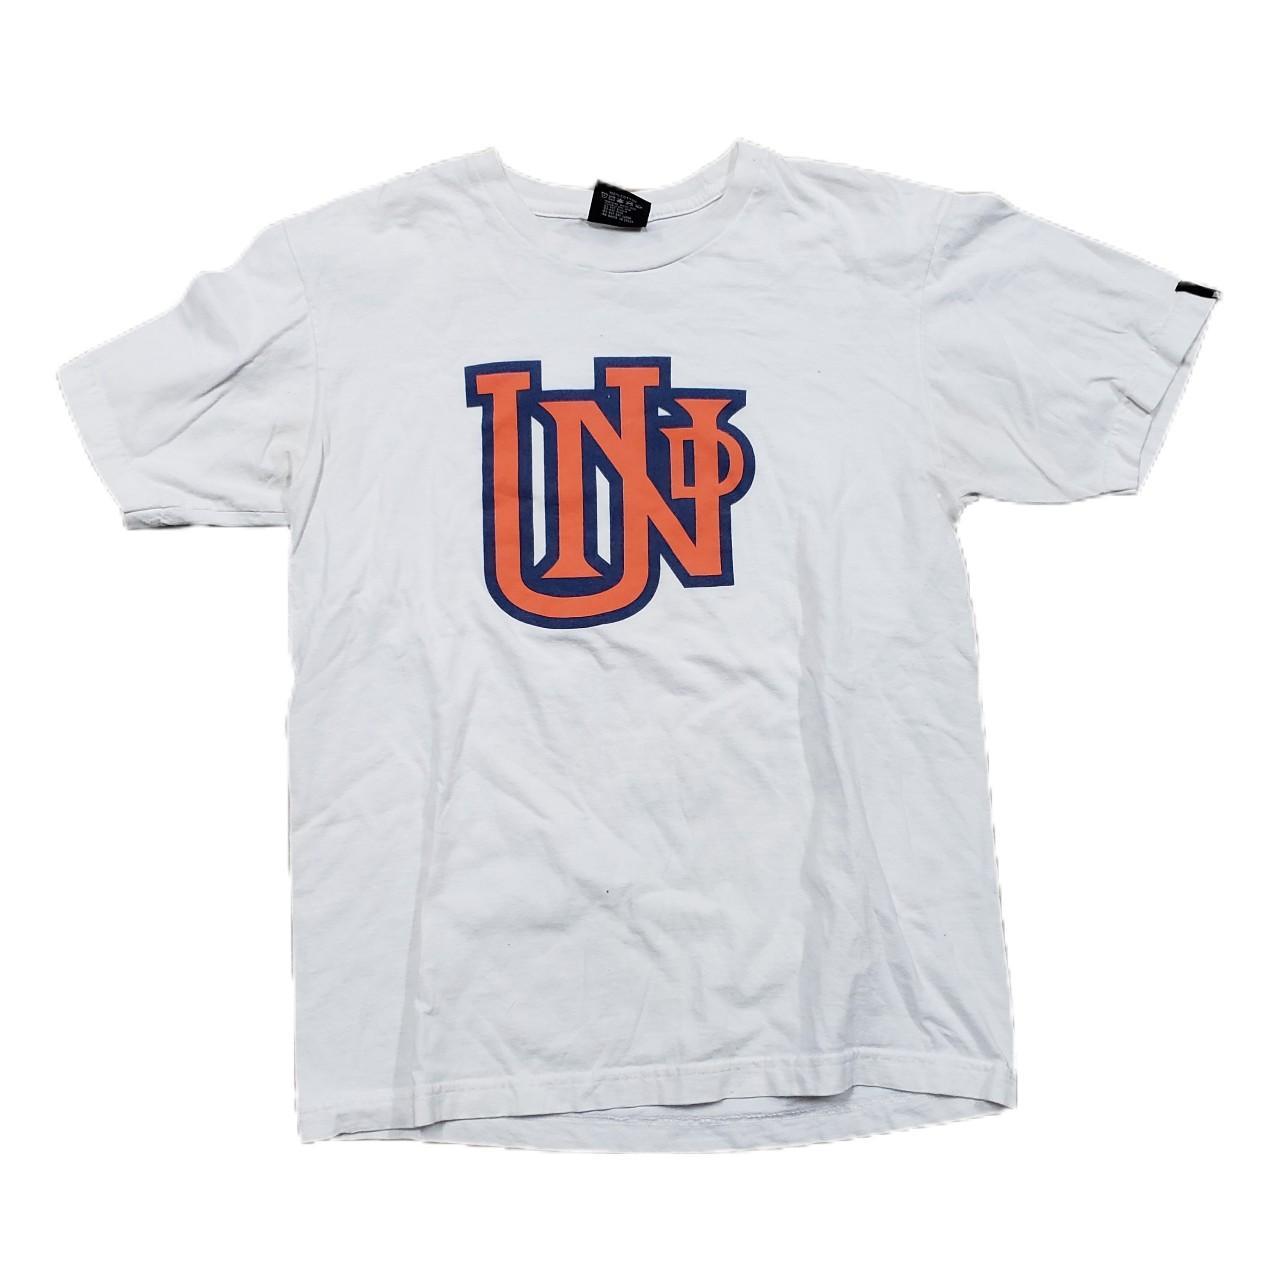 Product Image 1 - Men's Undefeated T-shirt 

Size: Medium

Color: